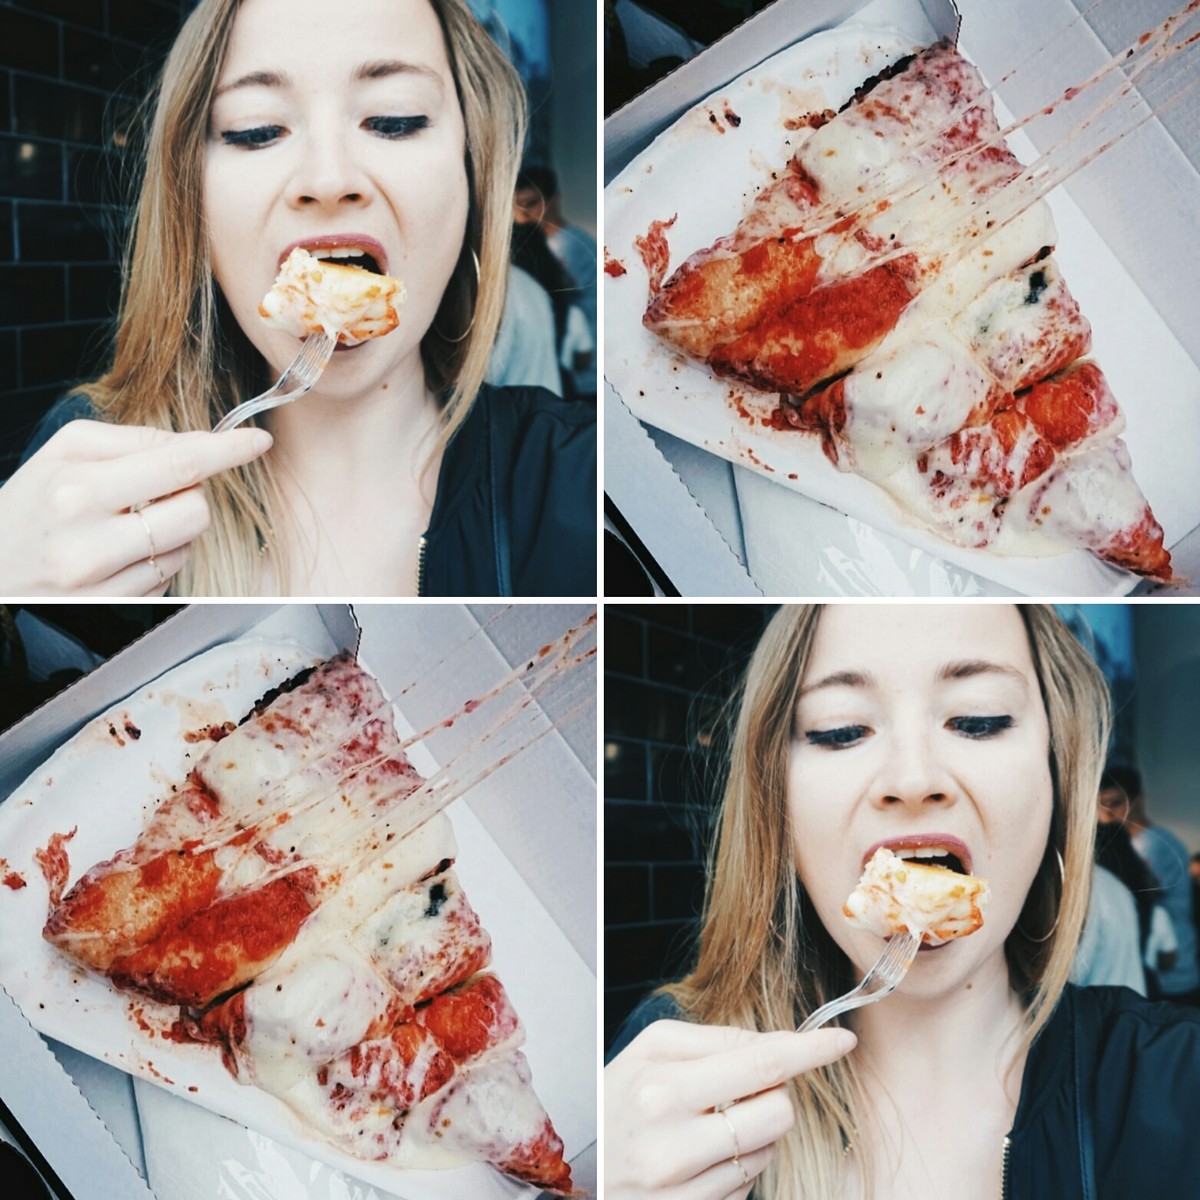 Me eating pizza from Spontini in Milan